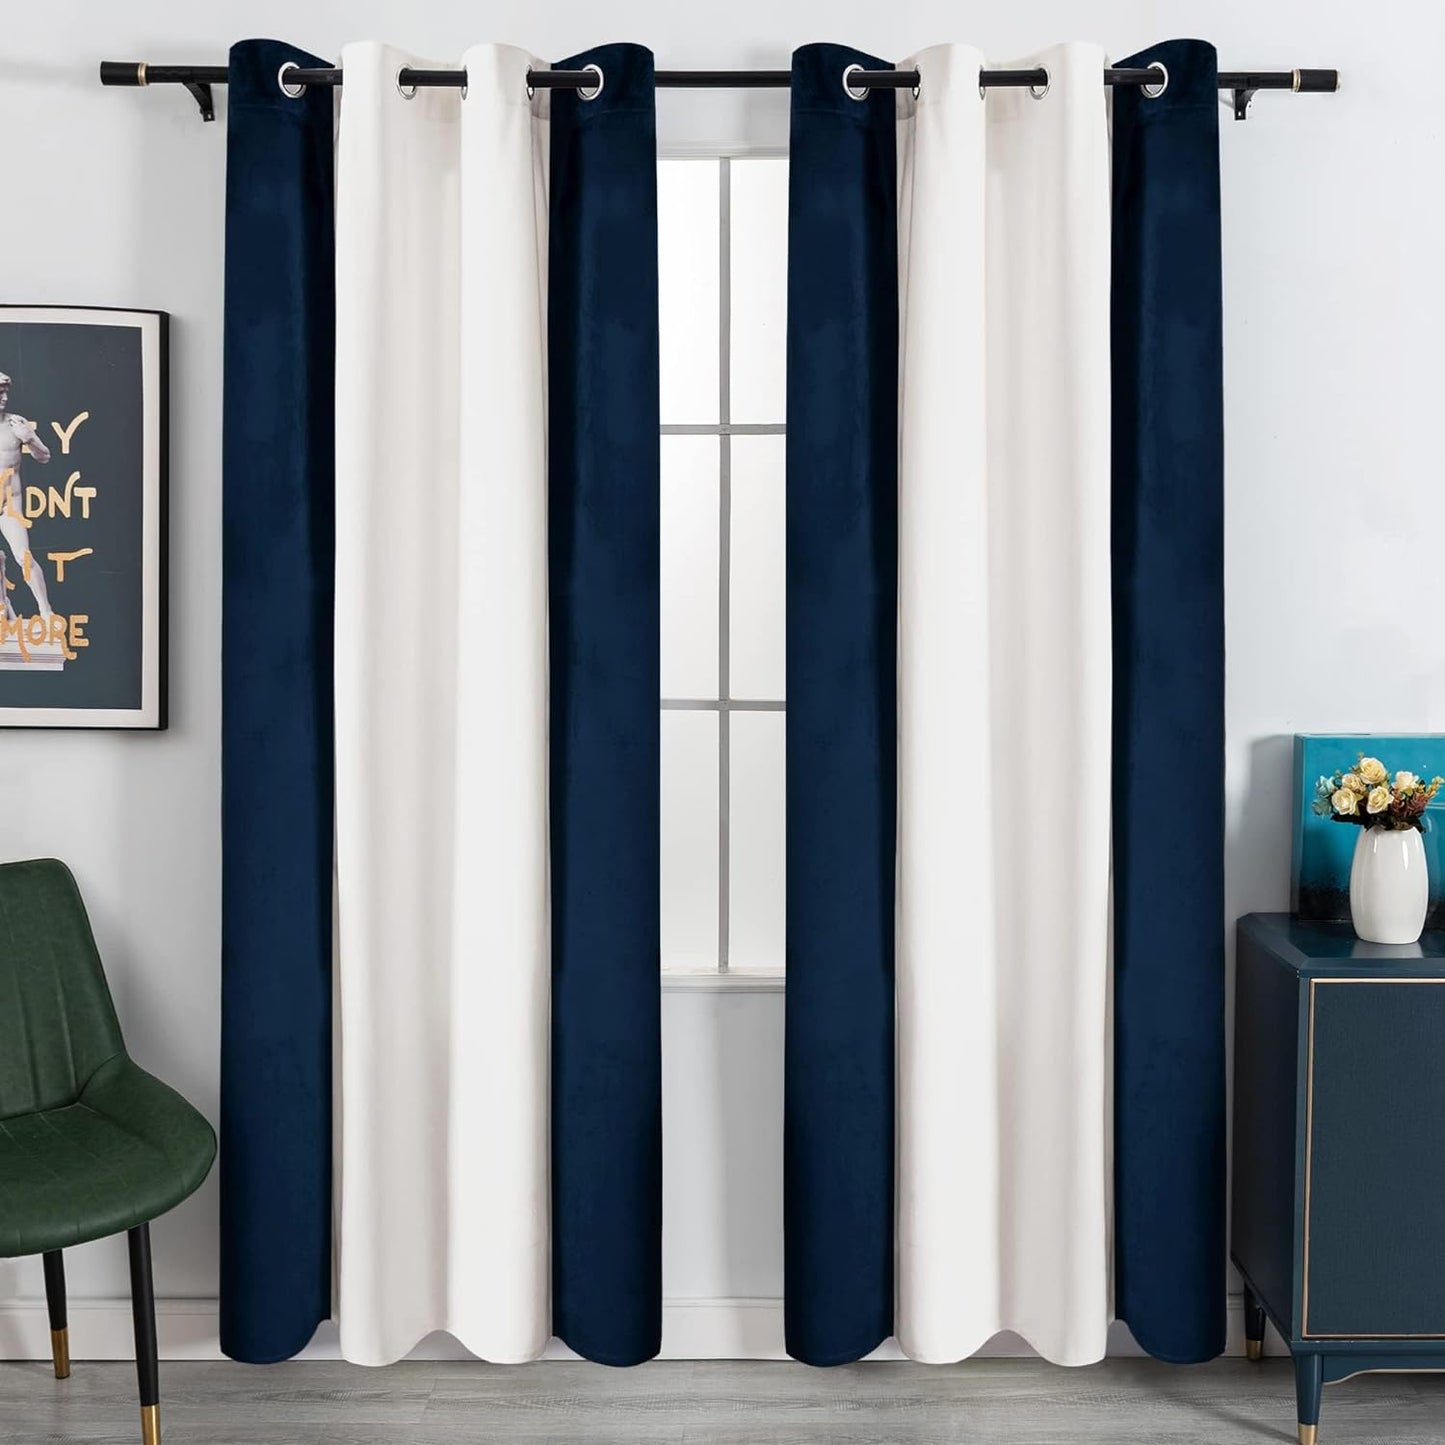 Victree Color Block Velvet Curtains for Bedroom, Patchwork Blackout Curtains 52 X 84 Inch Length - Room Darkening Sun Light Blocking Grommet Window Drapes for Living Room, 2 Panels, Black and White  Victree Navy/White 52 X 90 Inches 